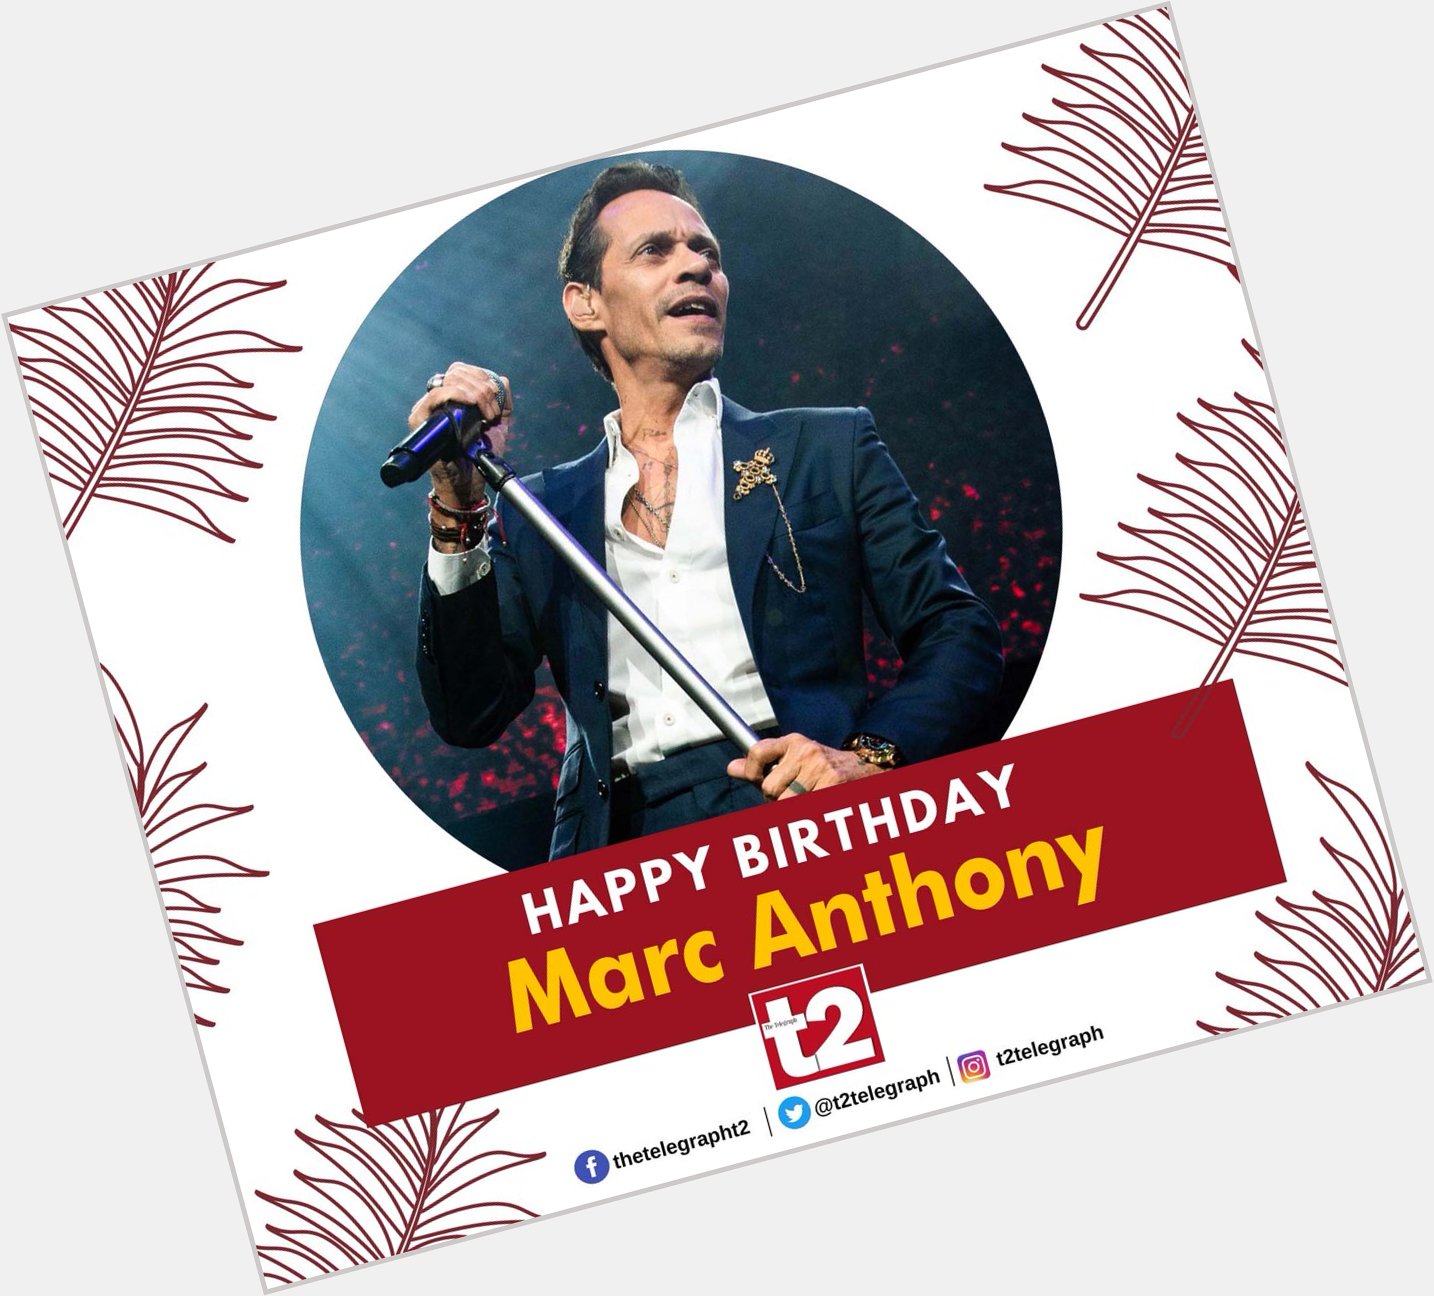 Happy birthday Marc Anthony and thanks for all the salsa-infused full-band music 